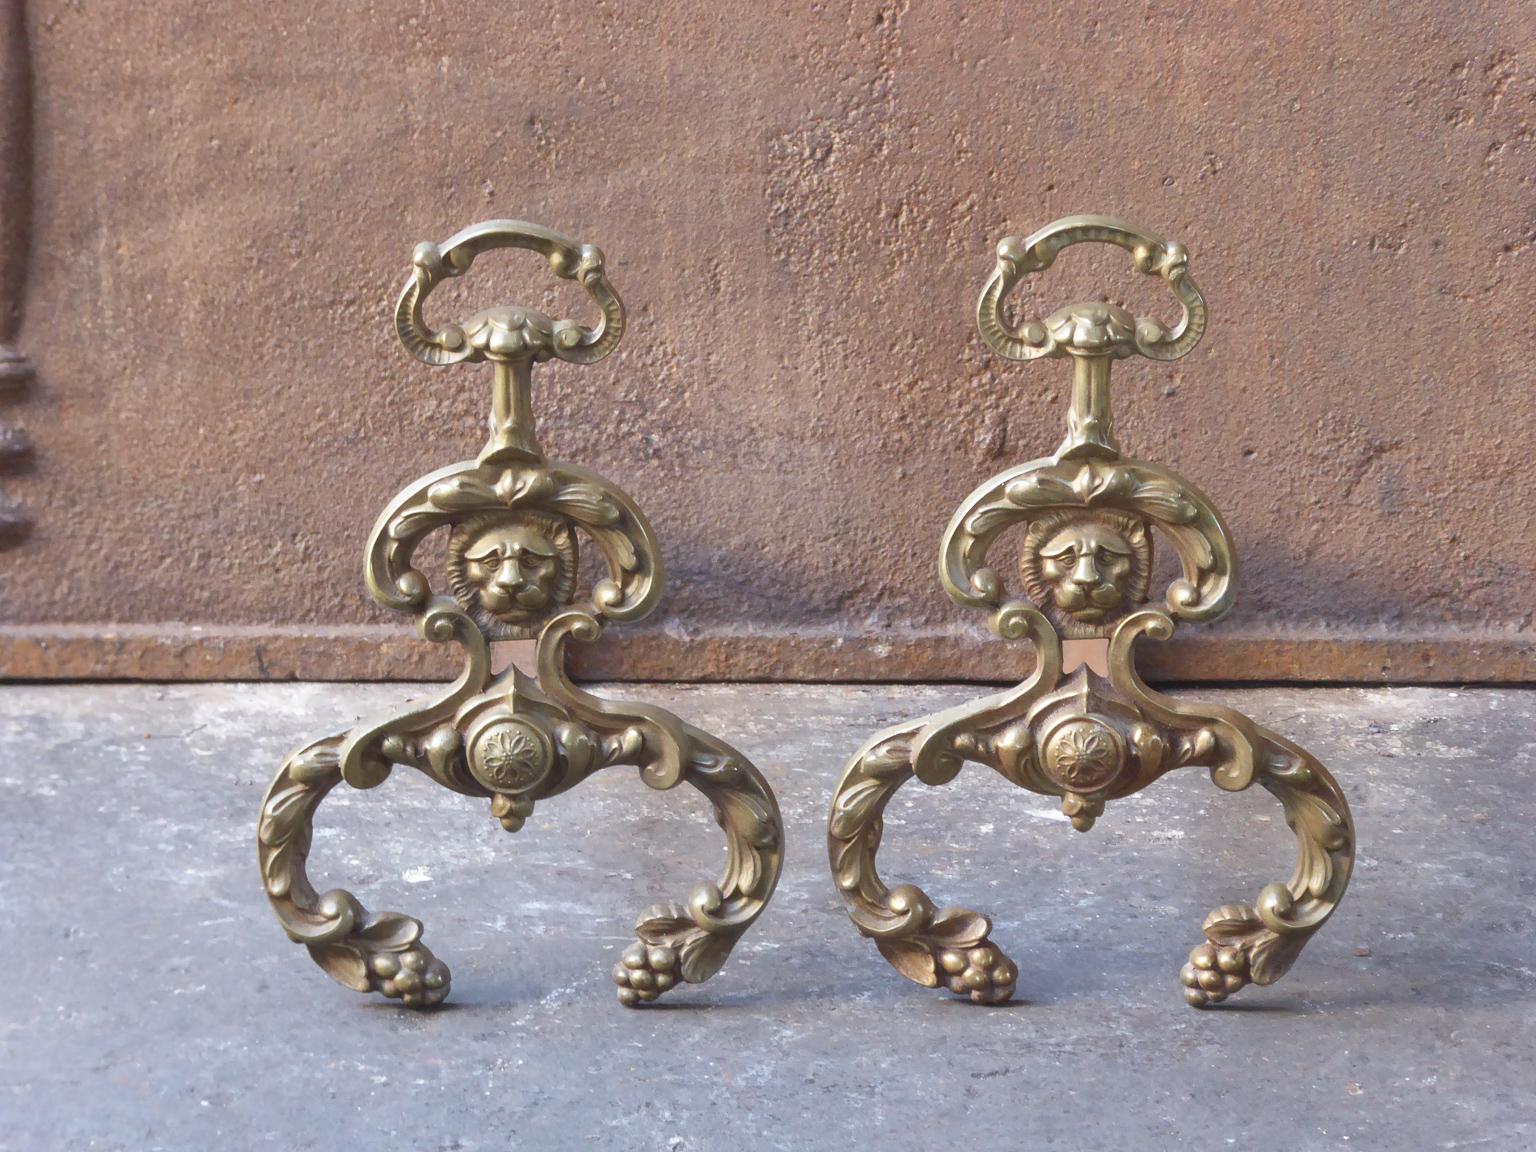 20th century French Louis XIV style andirons made of brass and wrought iron.







   